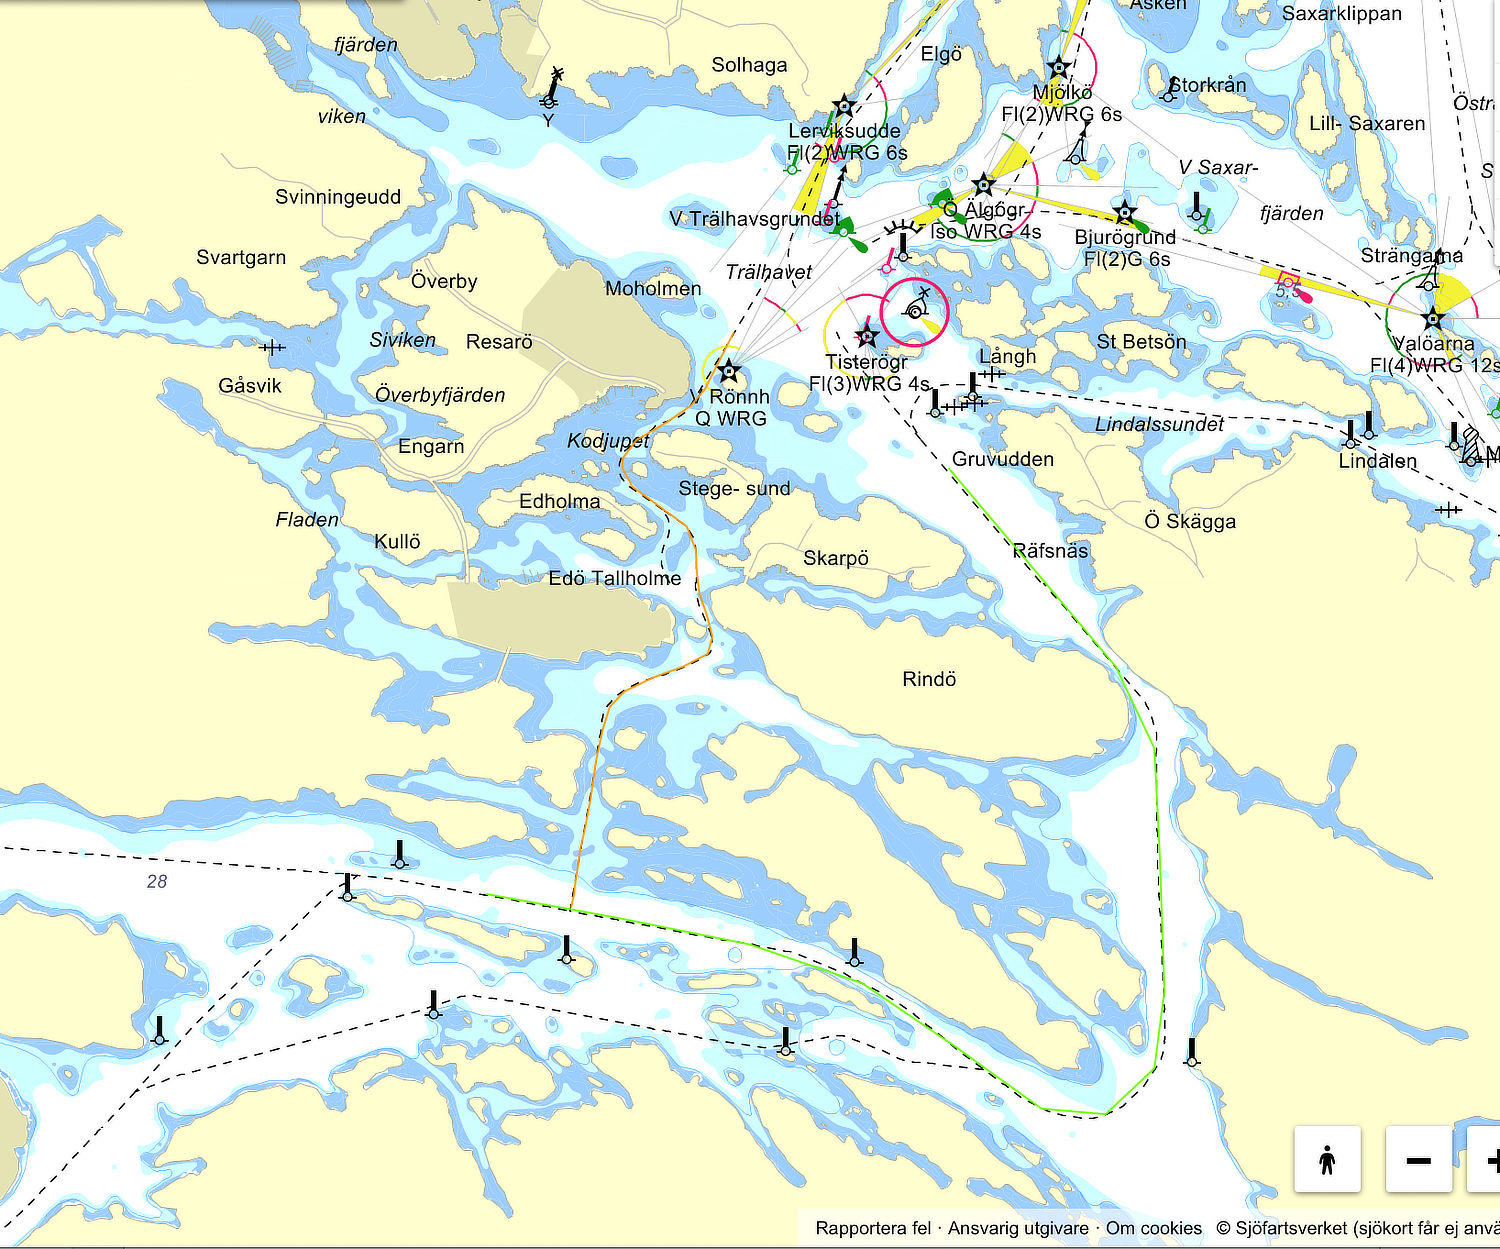 Stockholm eastern approaches - Cruising Attitude Sailing Blog | Discovery 55